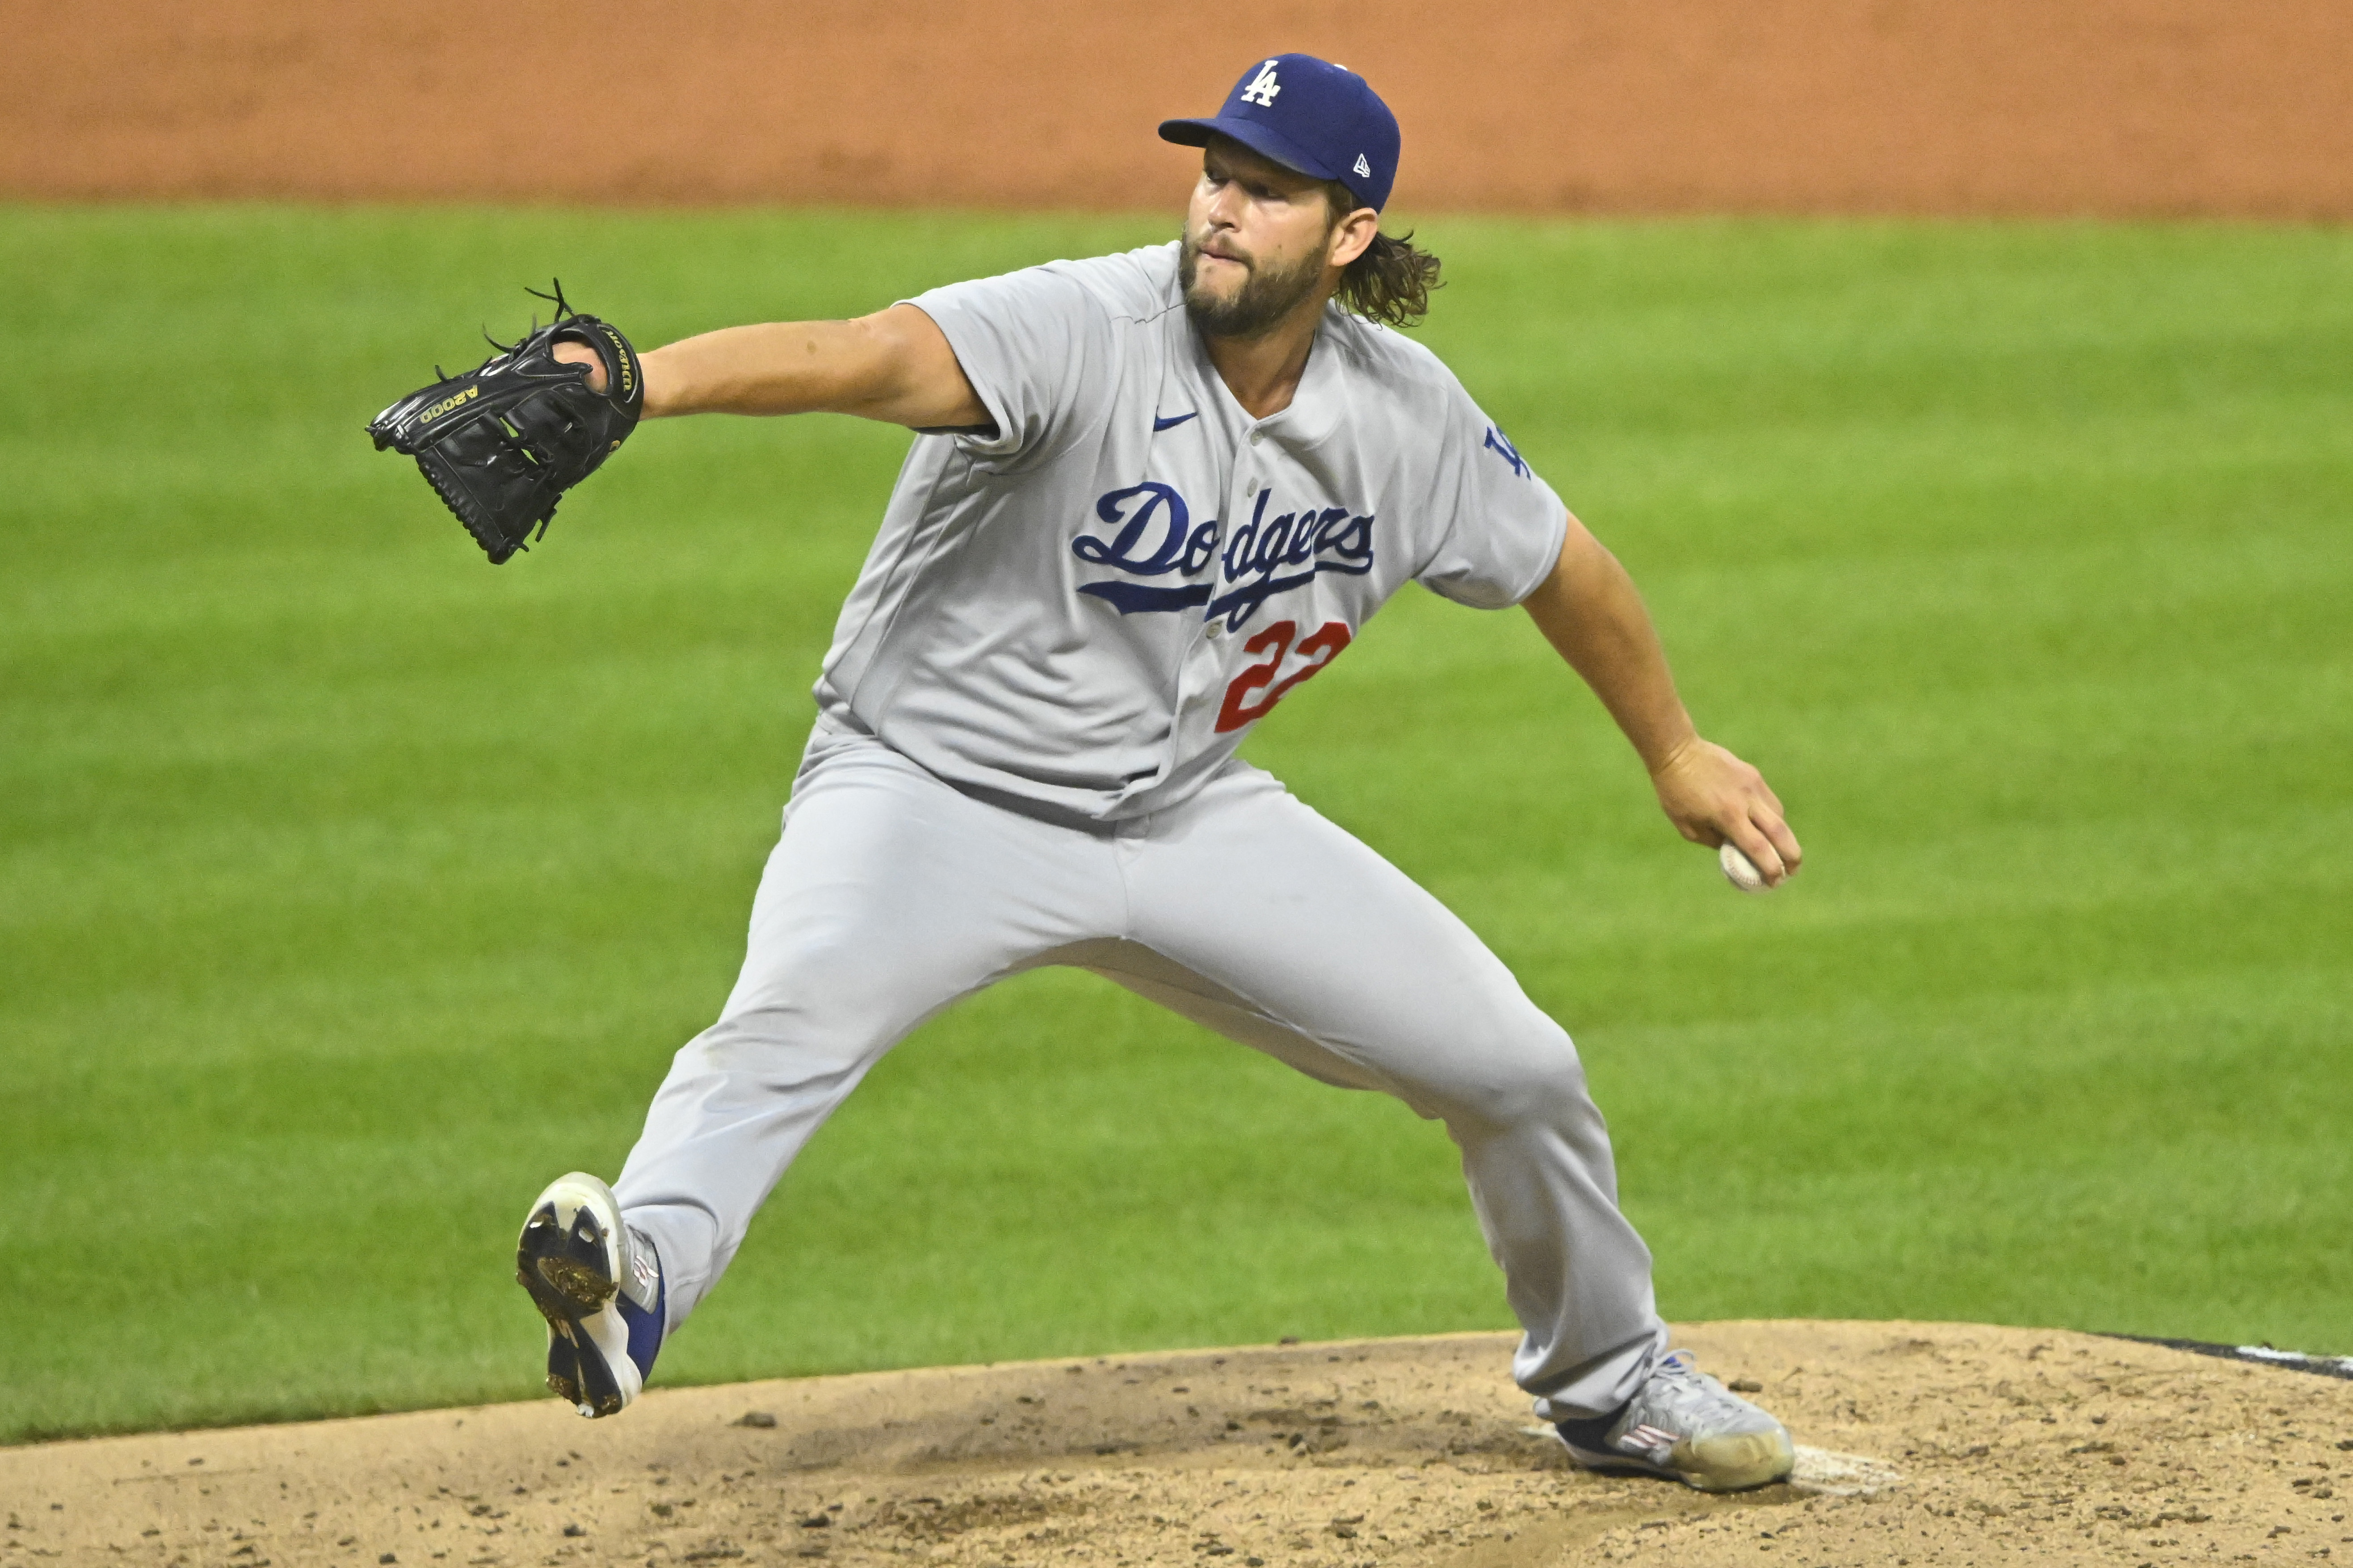 CLEVELAND, OH - AUGUST 23: Former Los Angeles Dodgers and